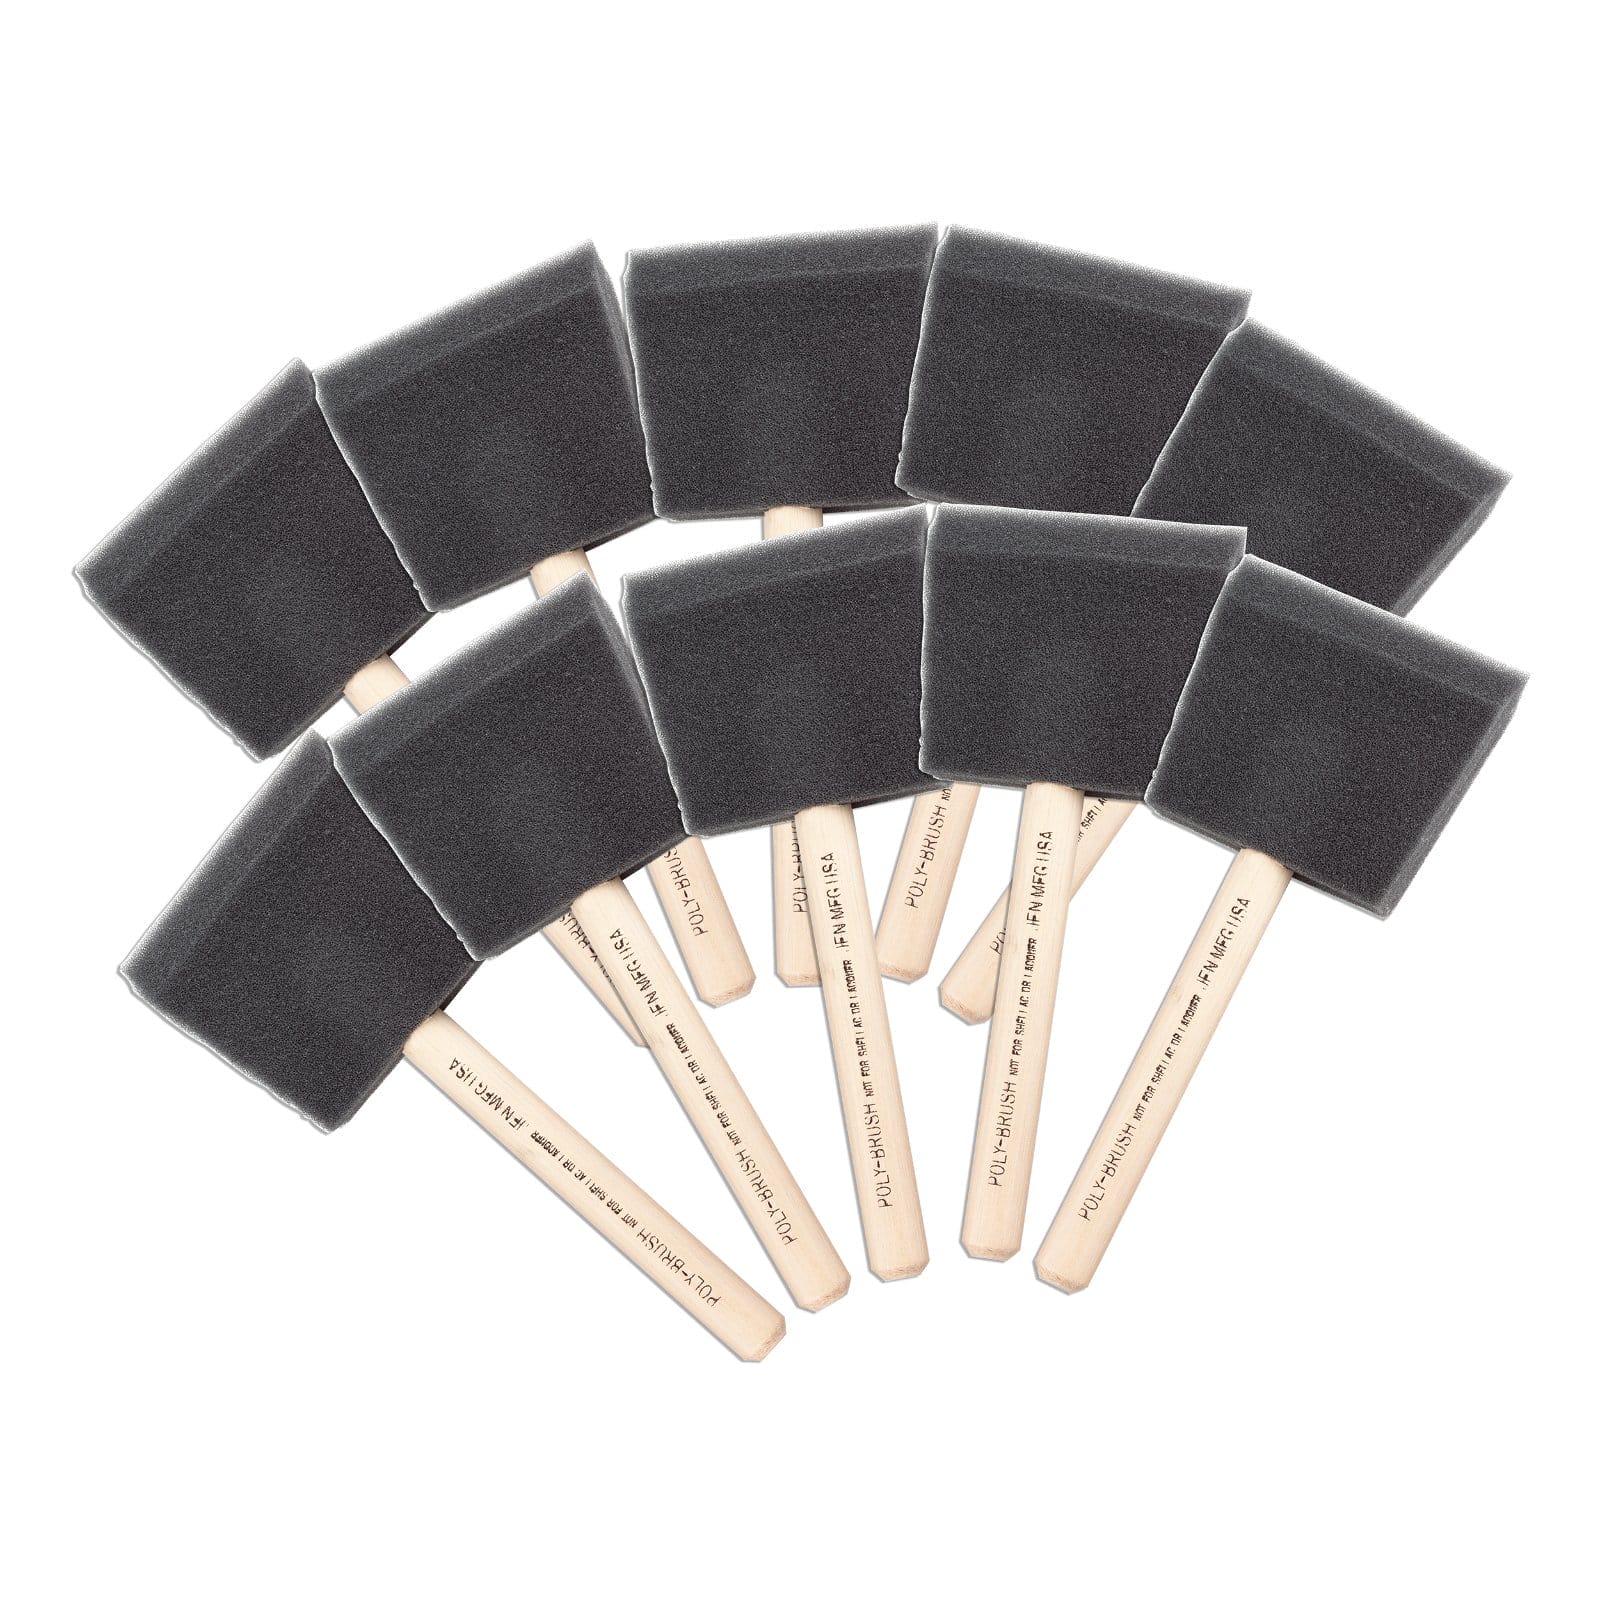 Only \\$5.99 - WoodRiver - Foam Brushes - 3" - 10 Piece